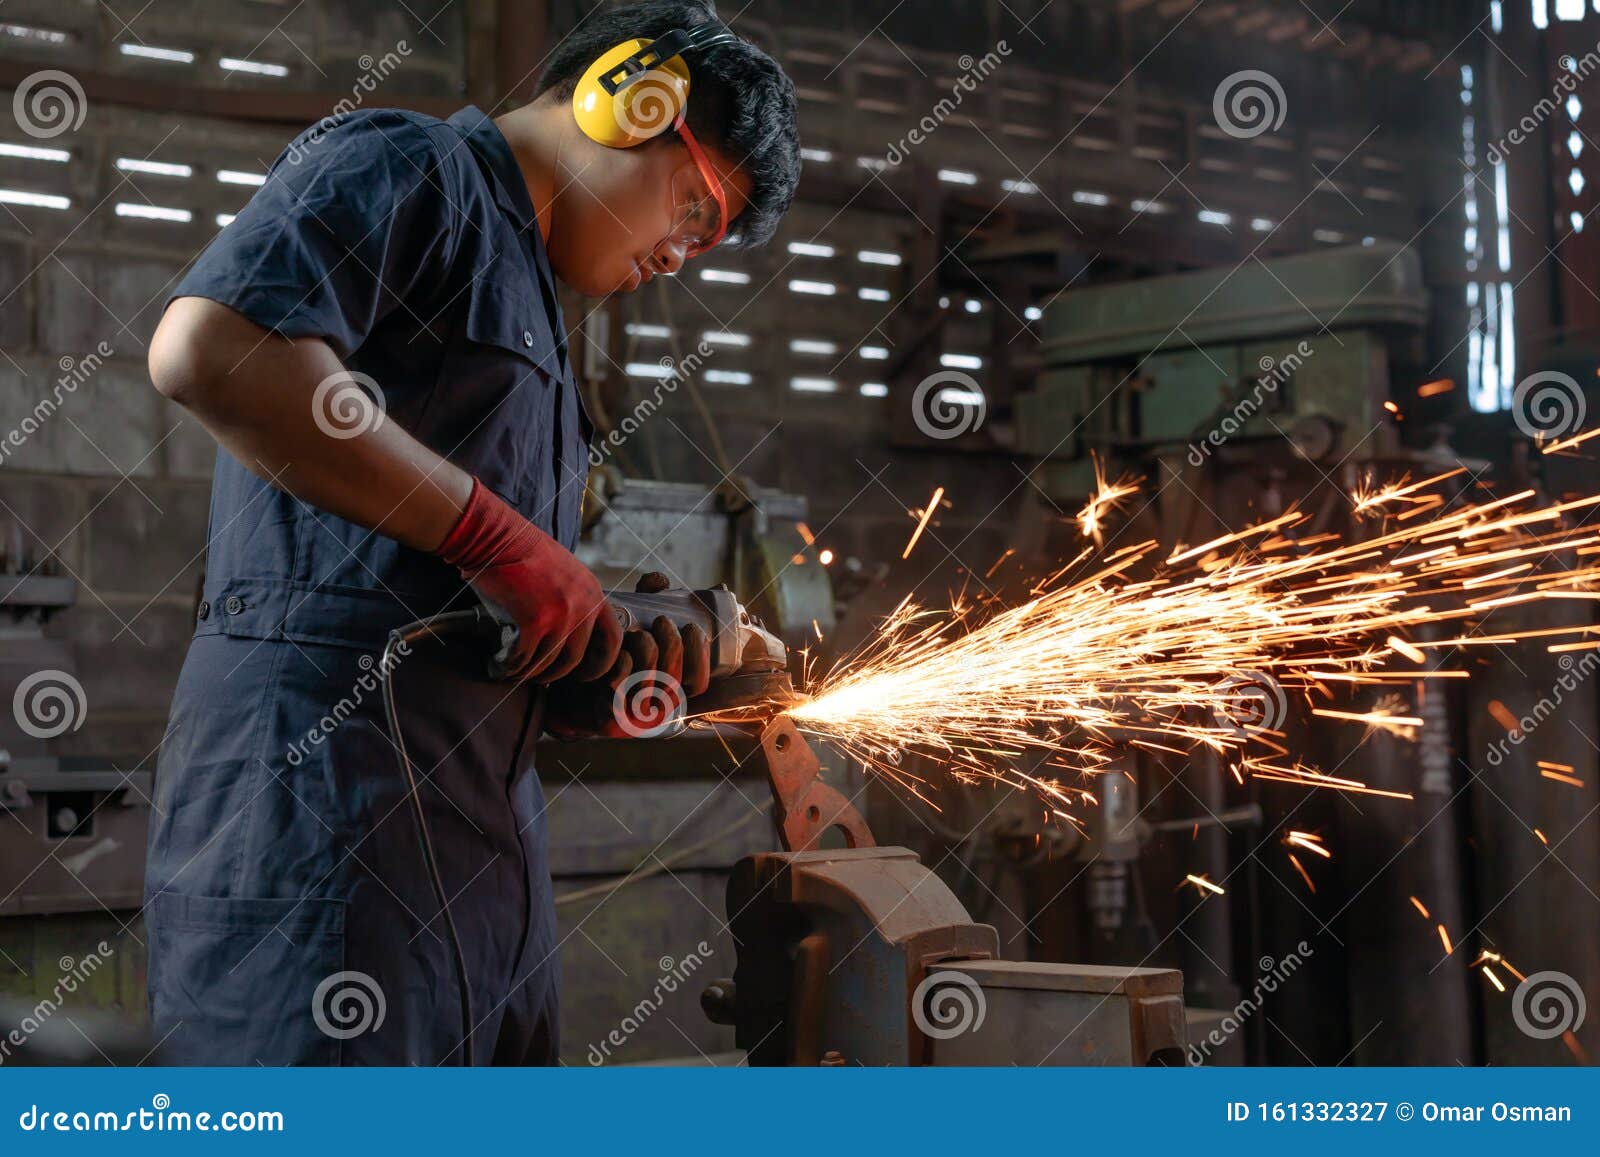 engineer operating angle grinder hand tools in manufacturing factory - mechanical engineering student using power tool with hot